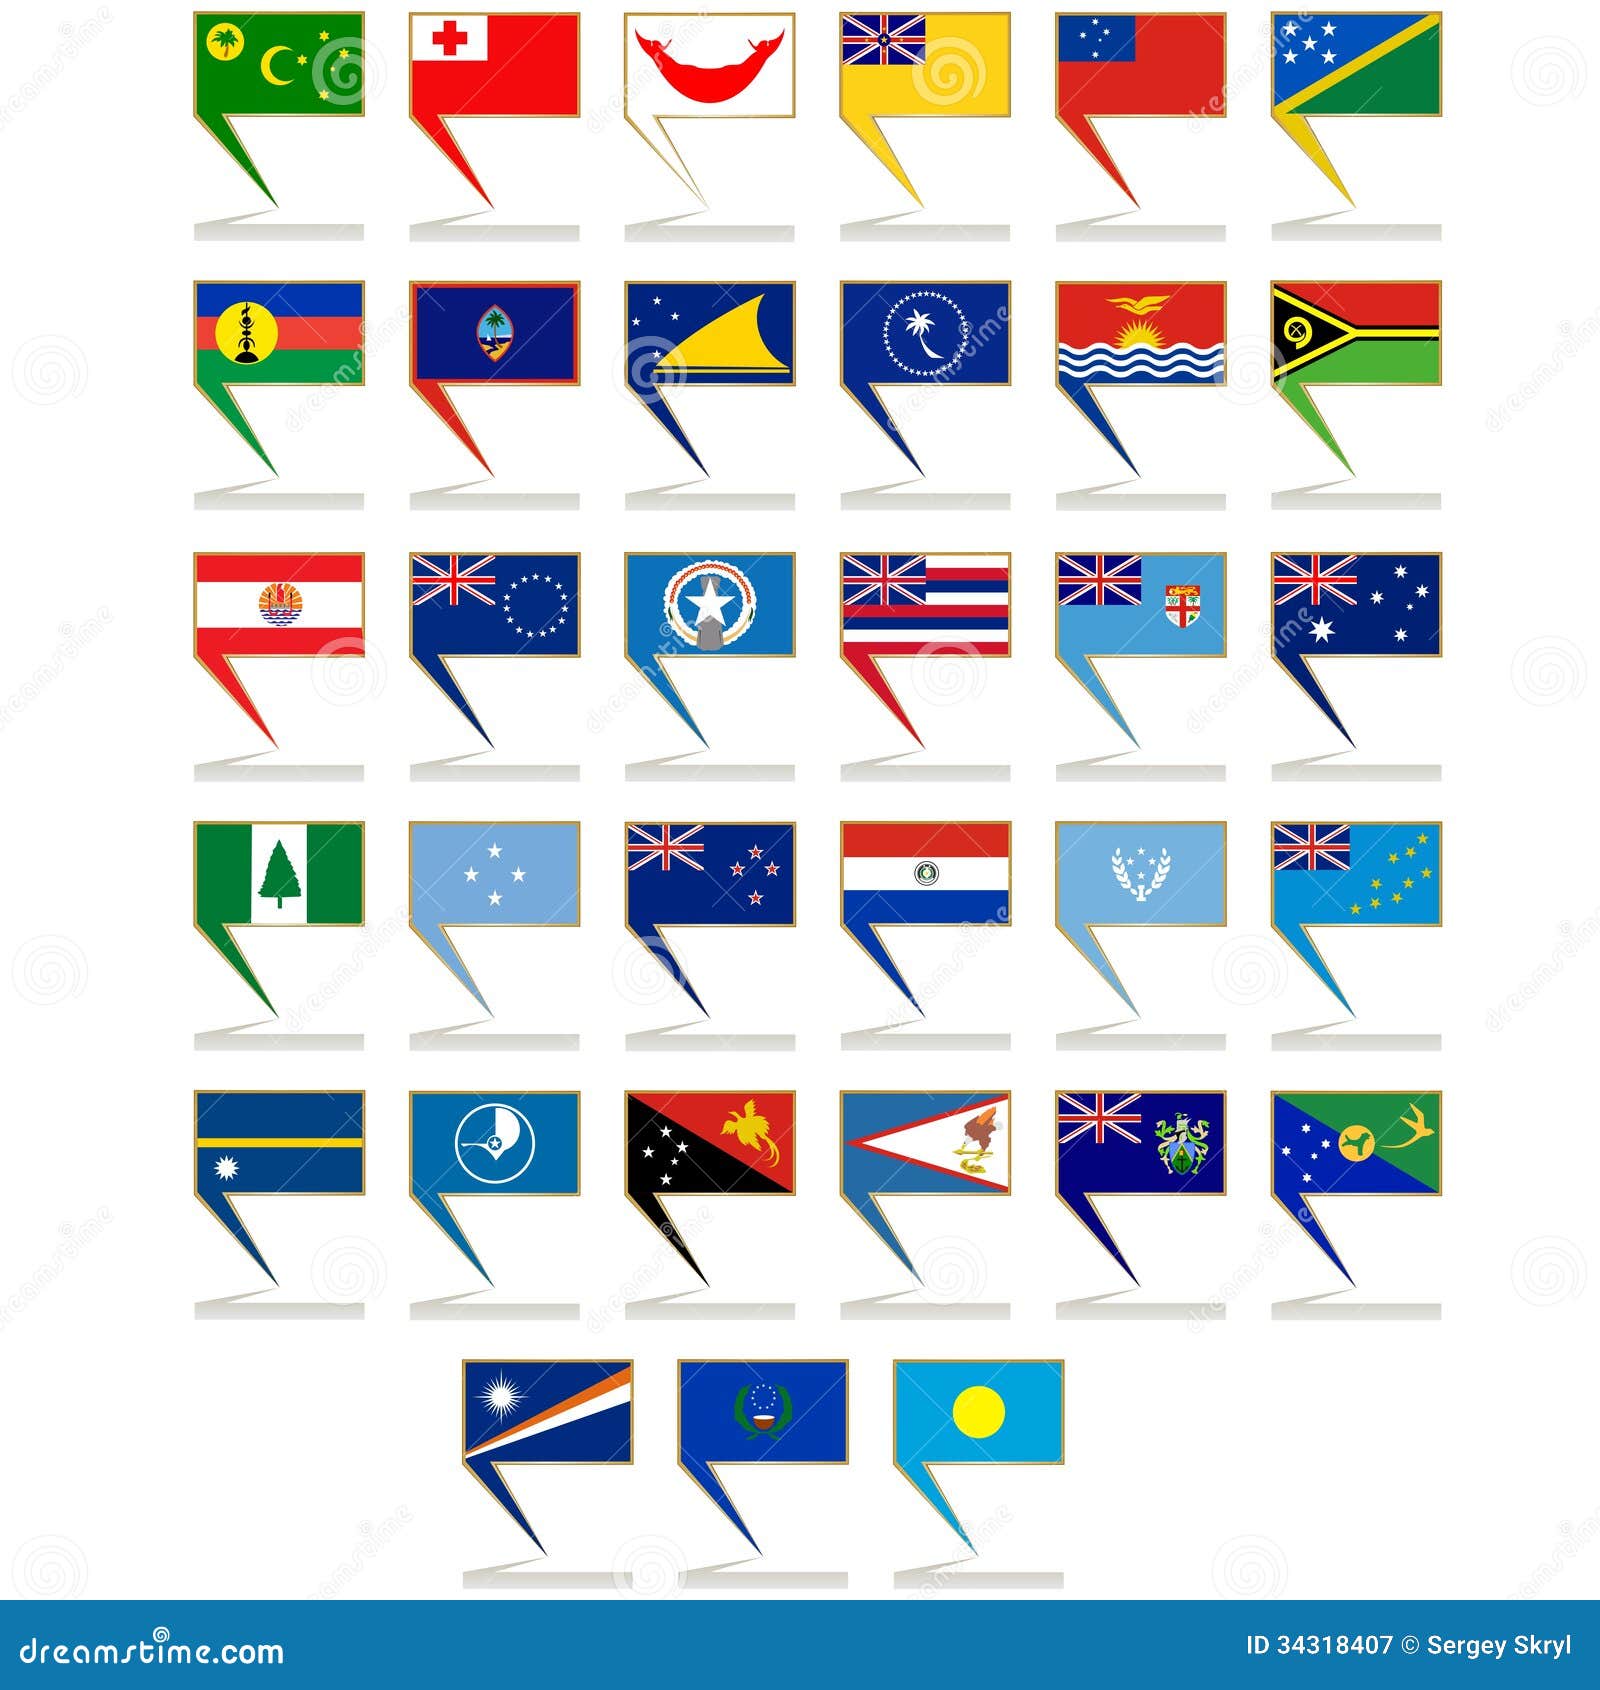 oceania country flags